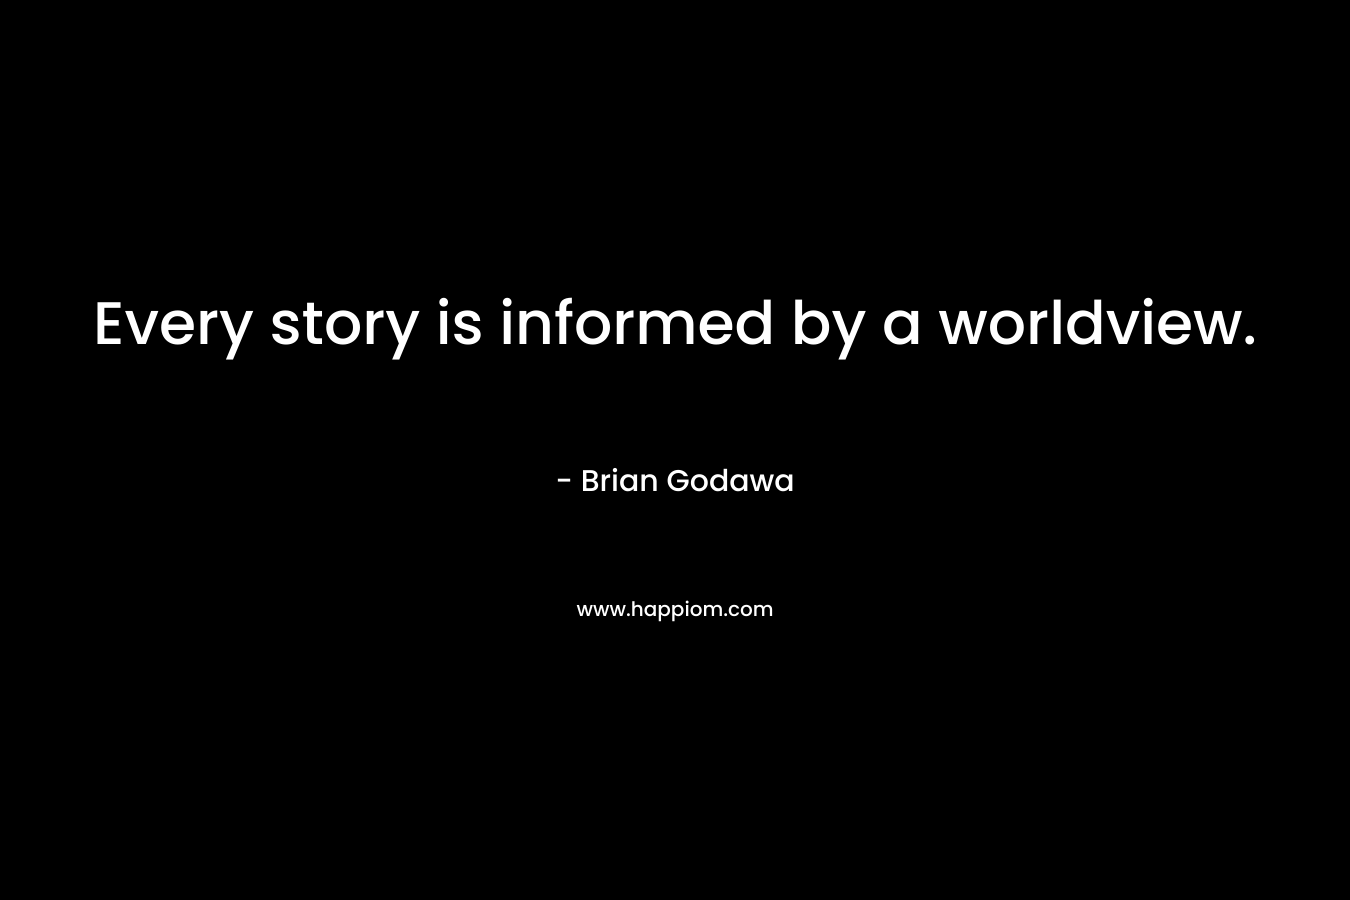 Every story is informed by a worldview.